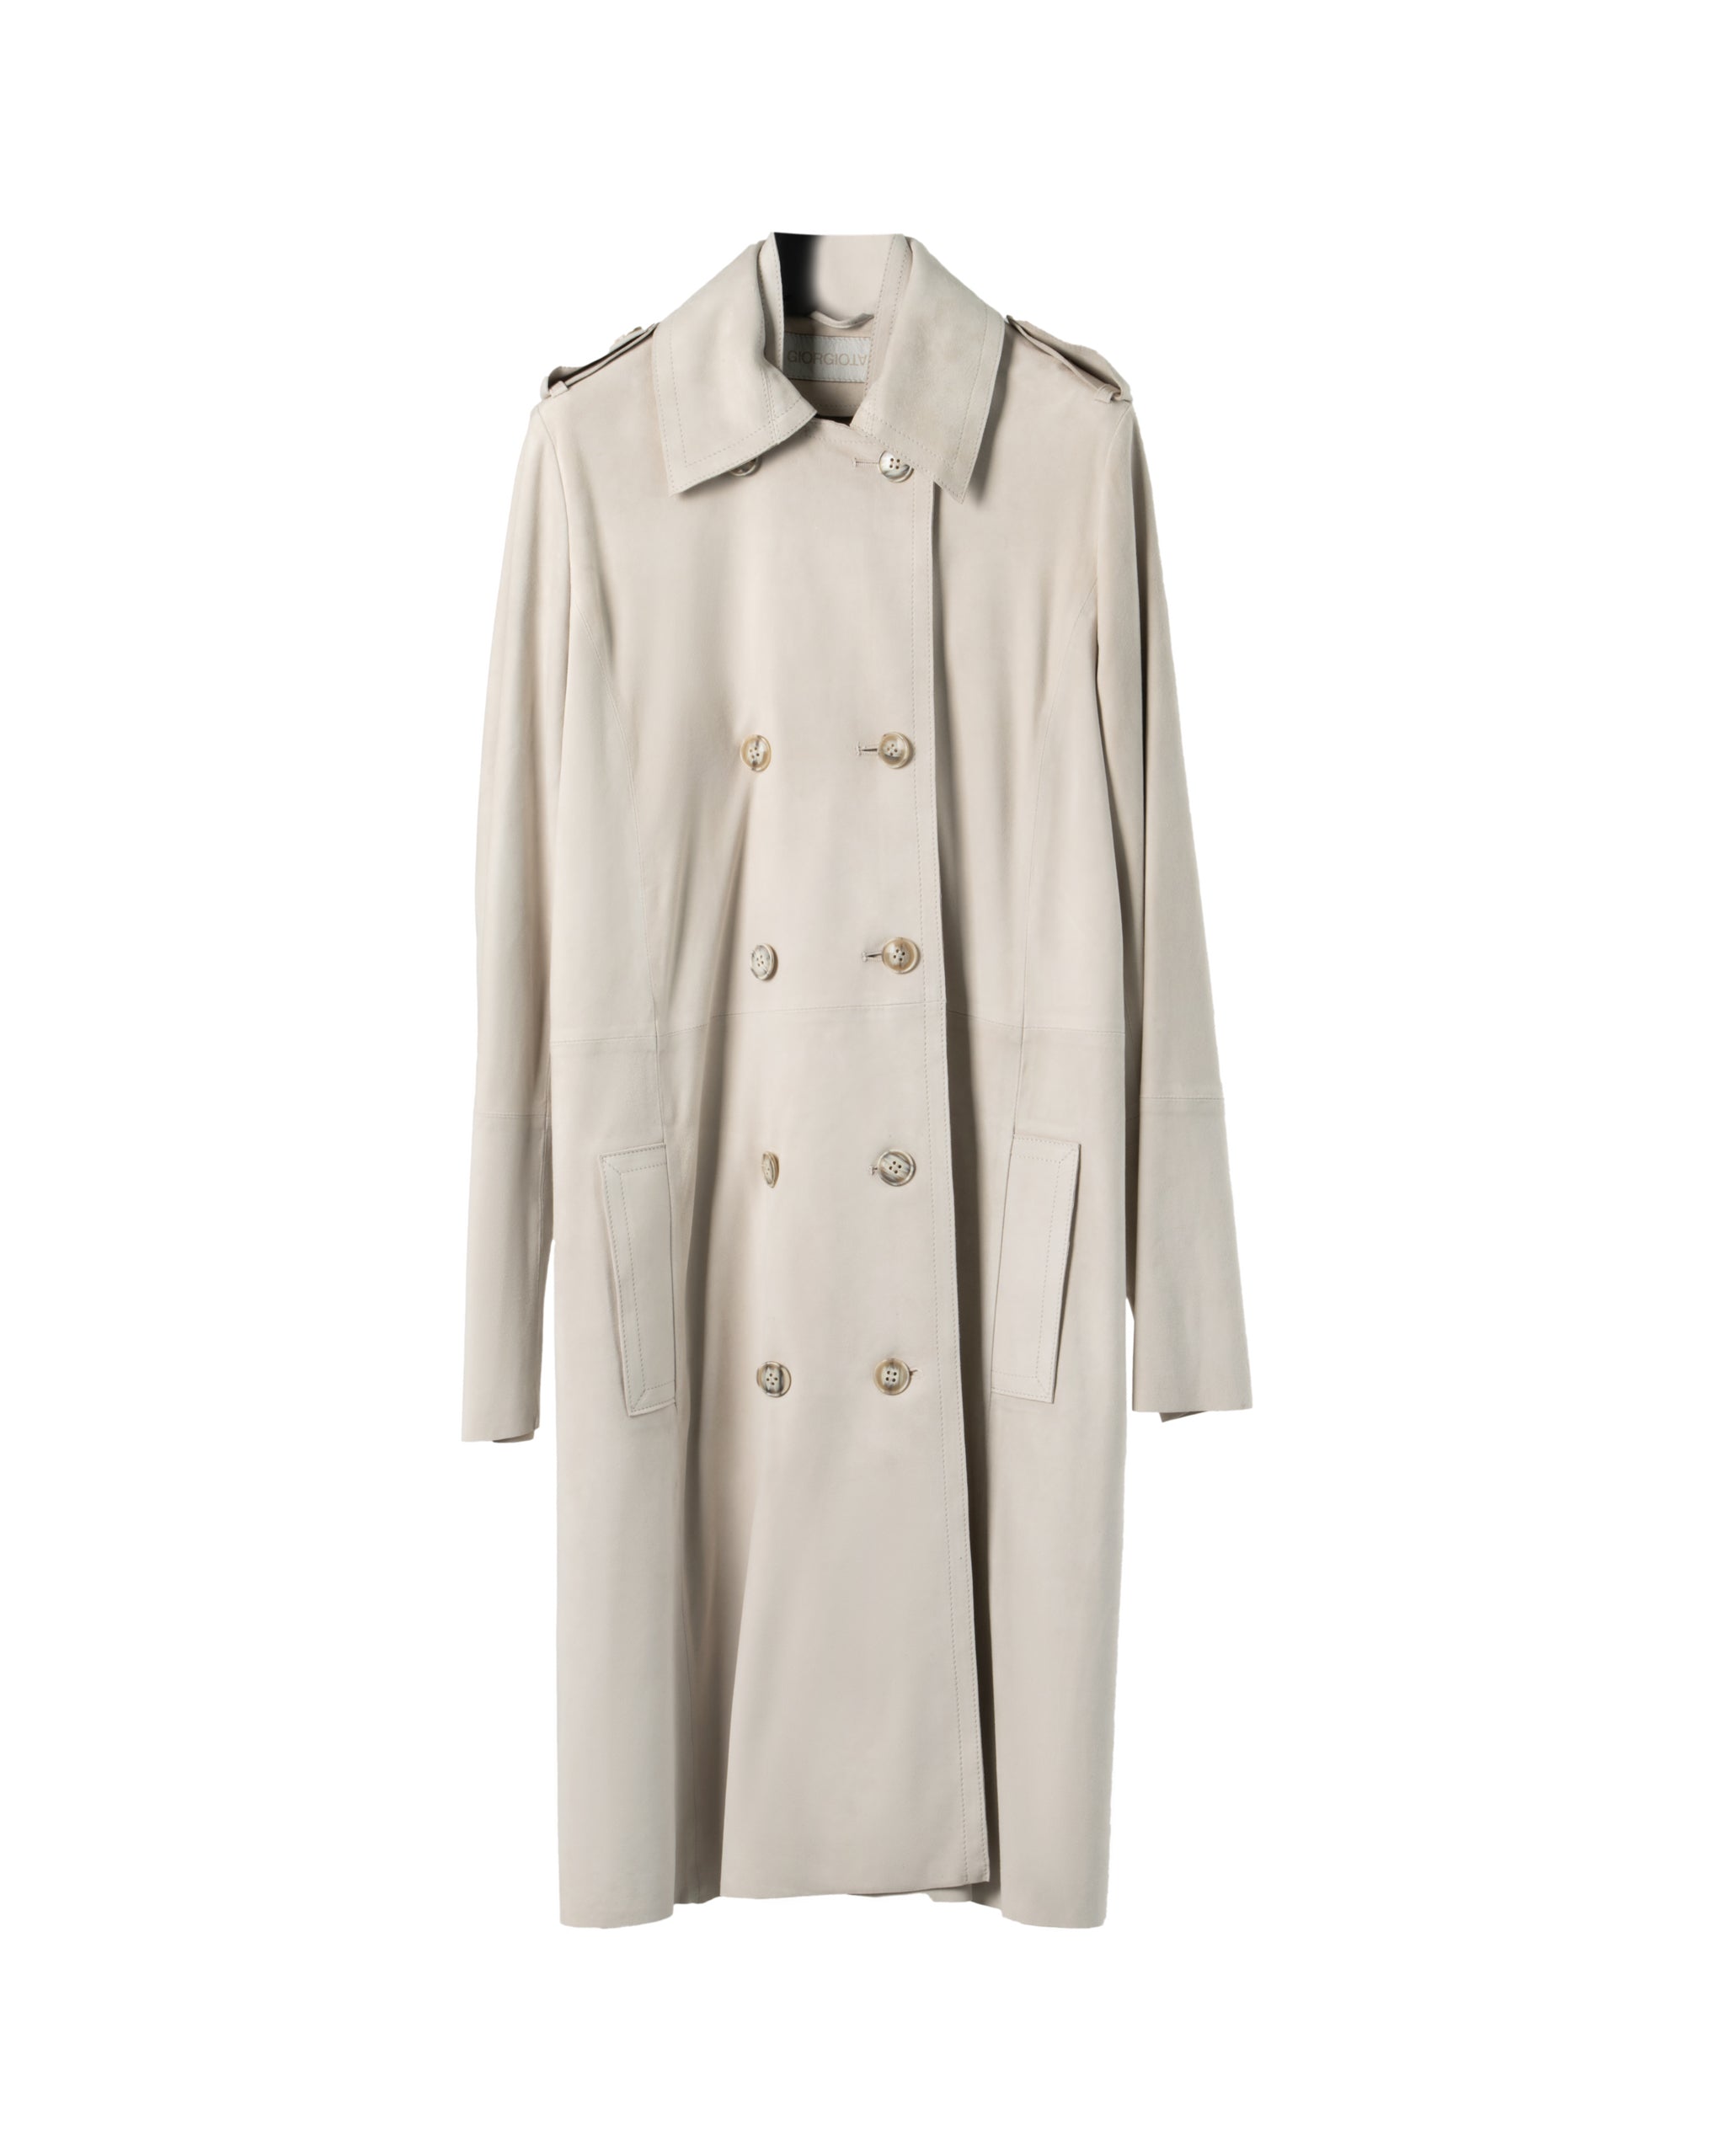 SUEDE LIGHT LEATHER TRENCH